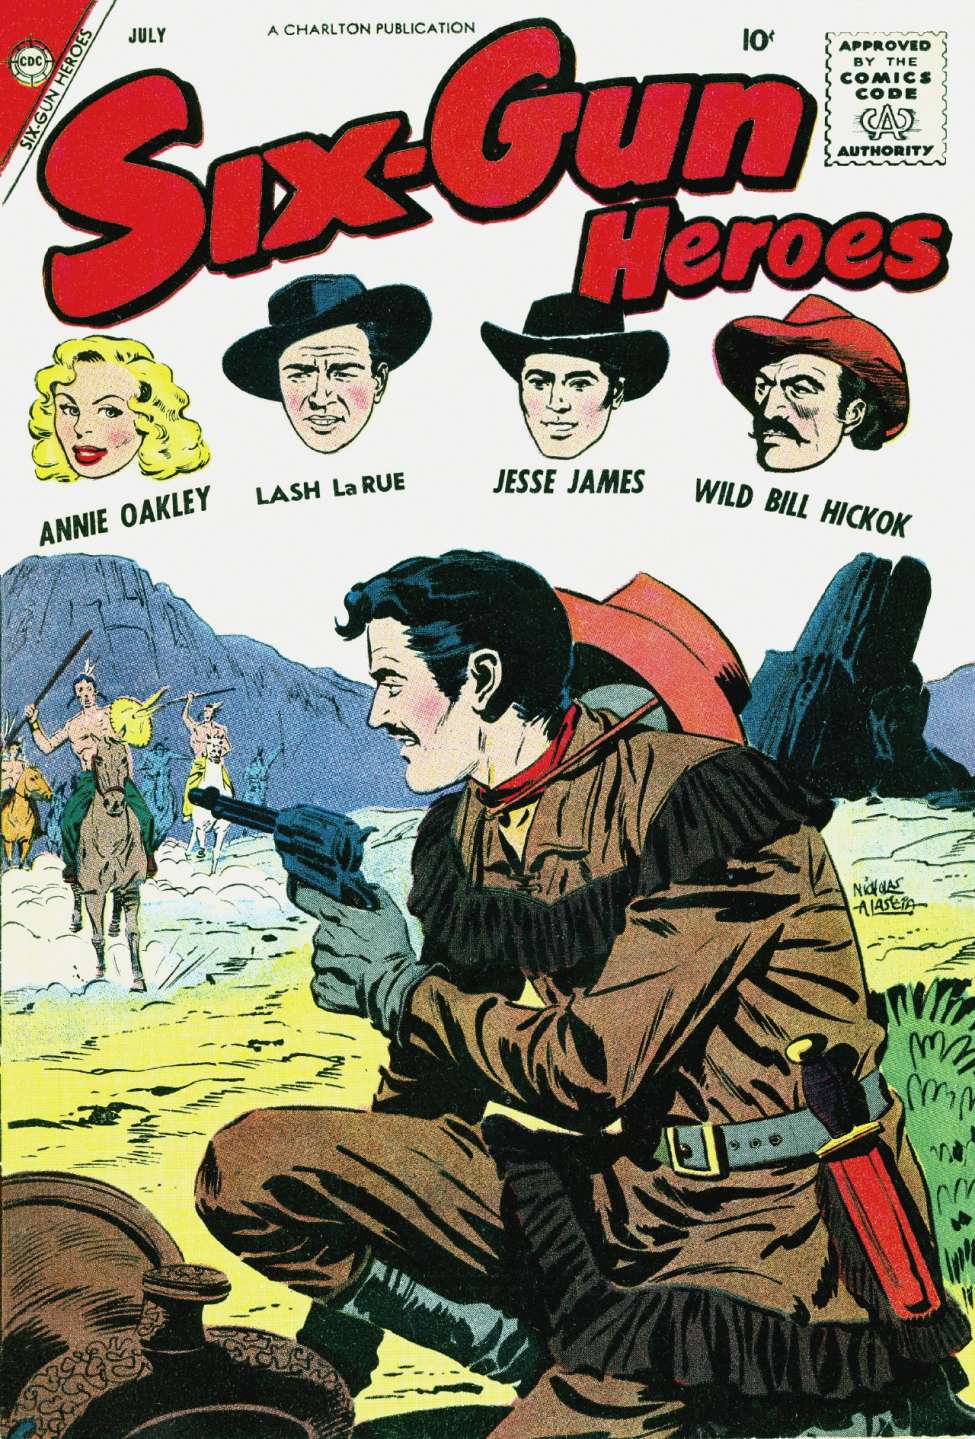 Book Cover For Six-Gun Heroes 47 - Version 1